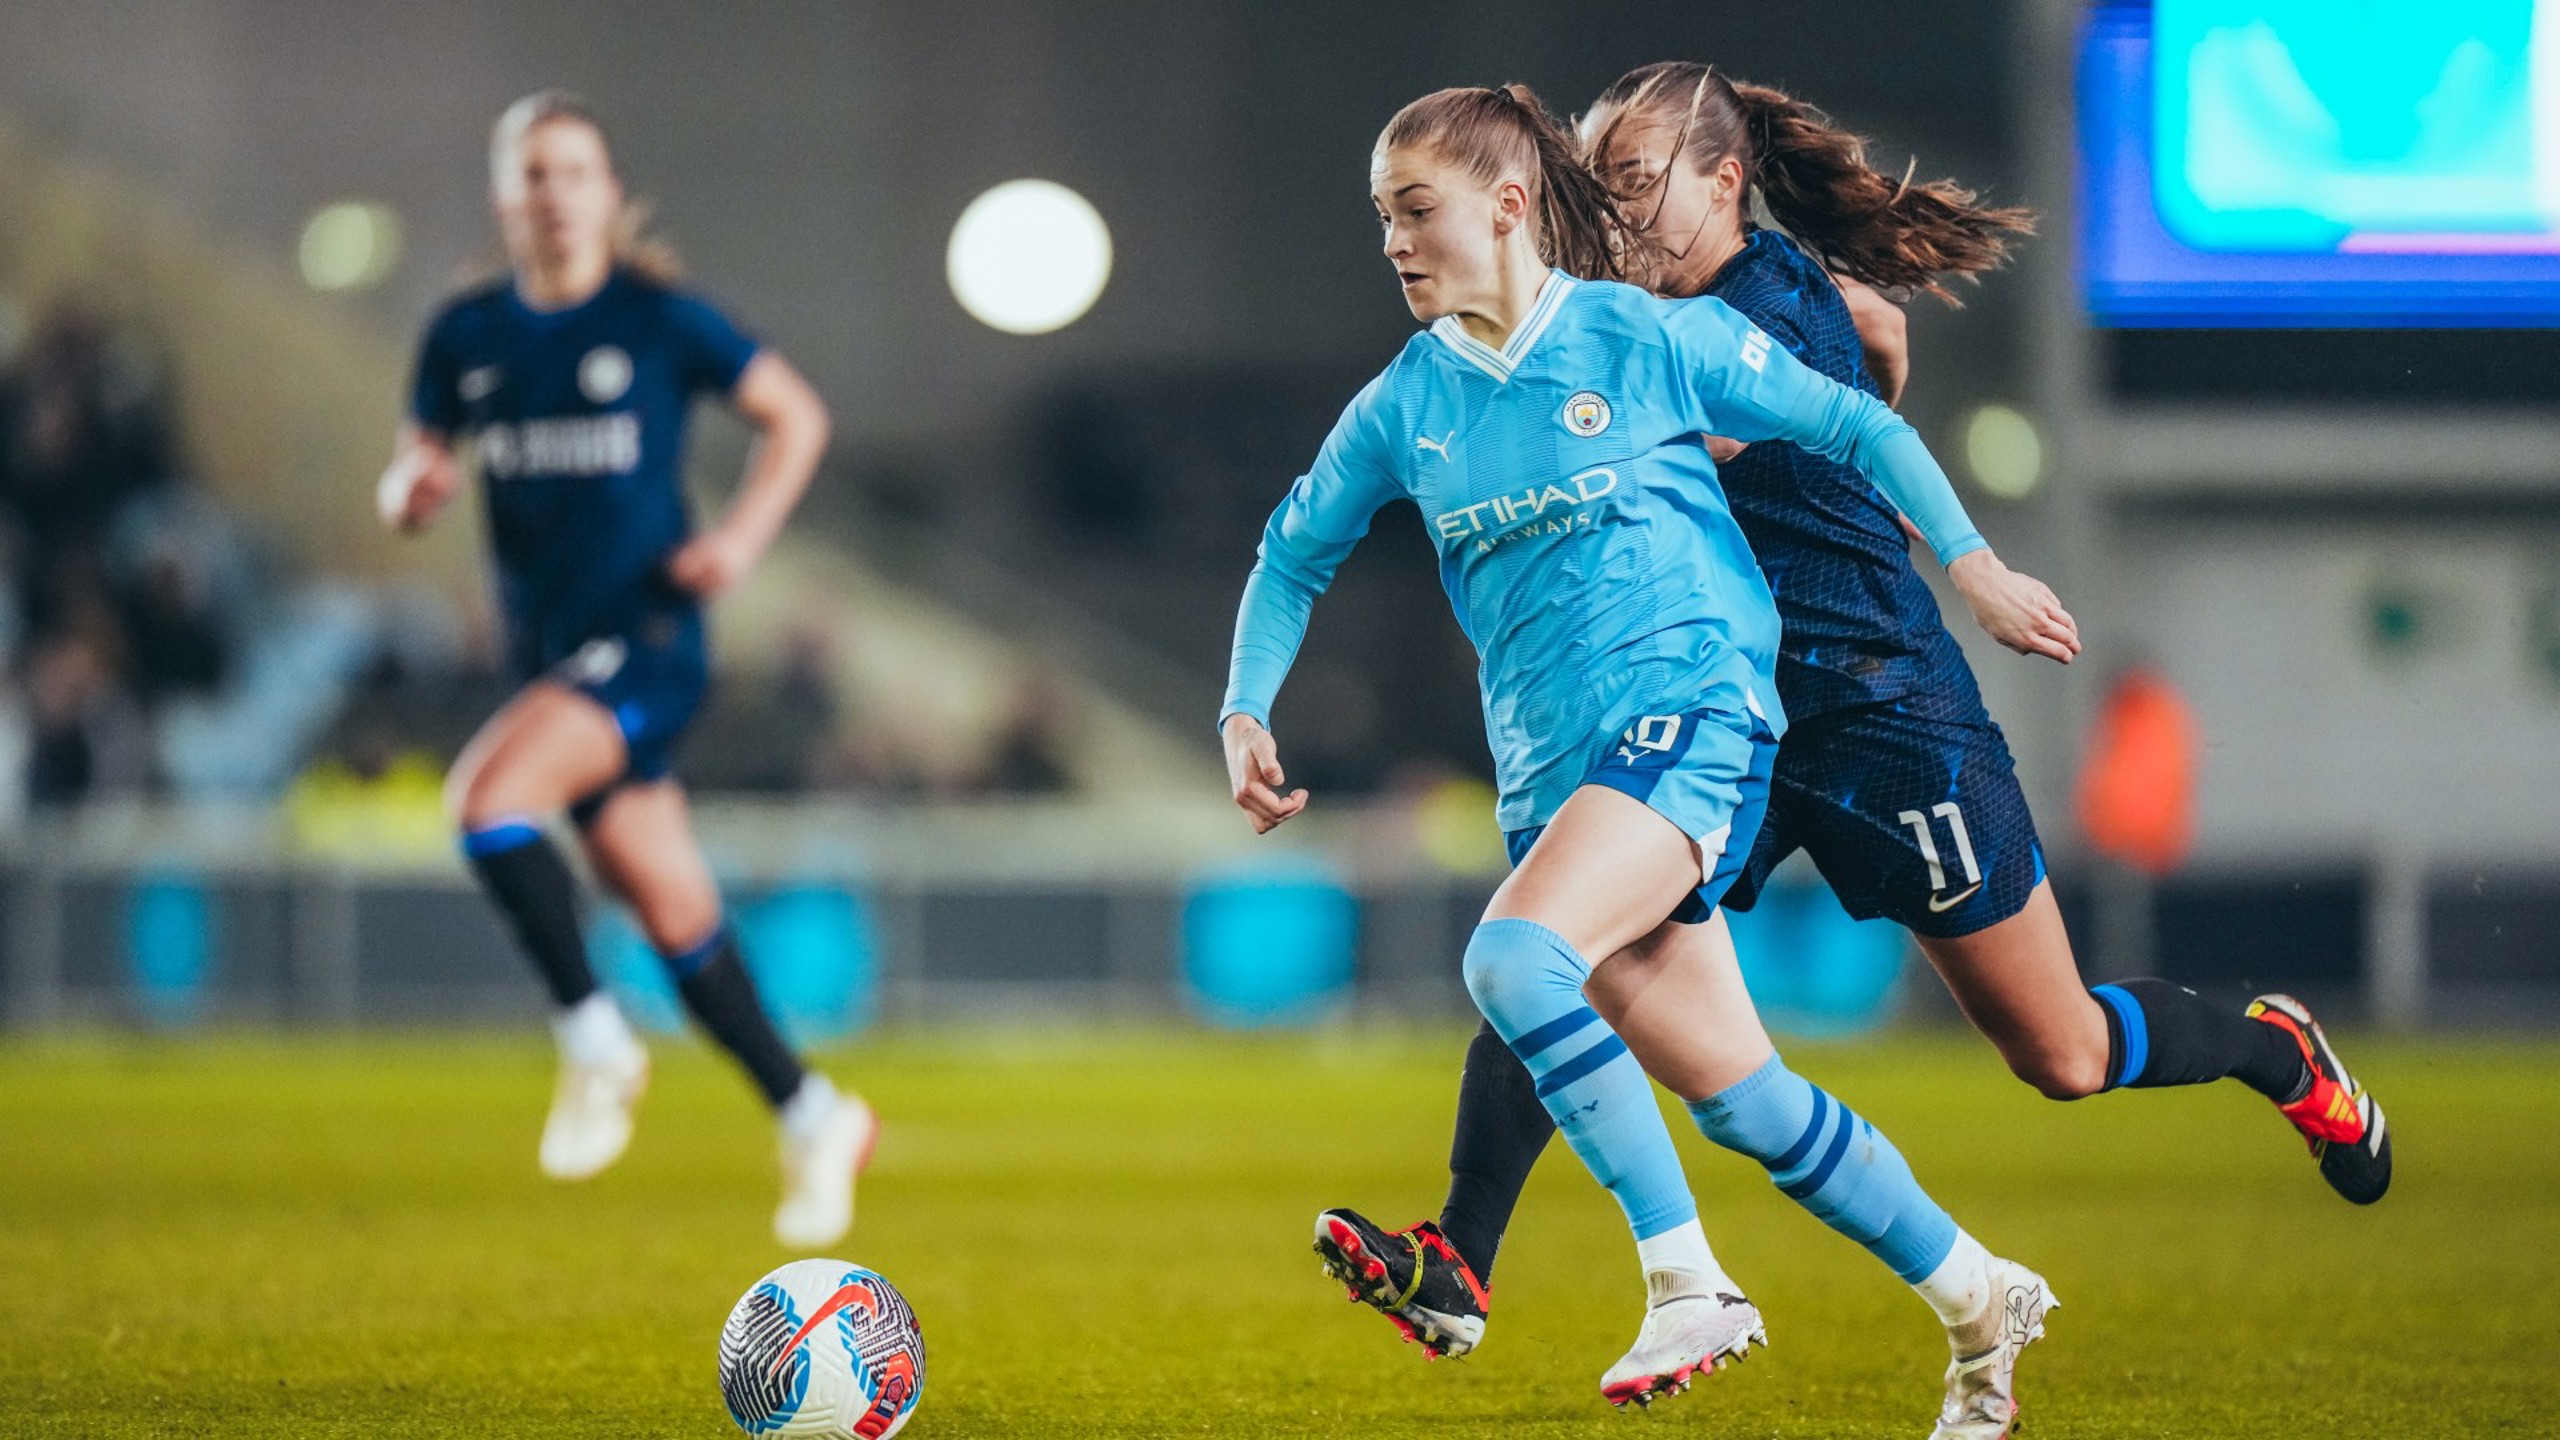 City edged out in Conti Cup semis